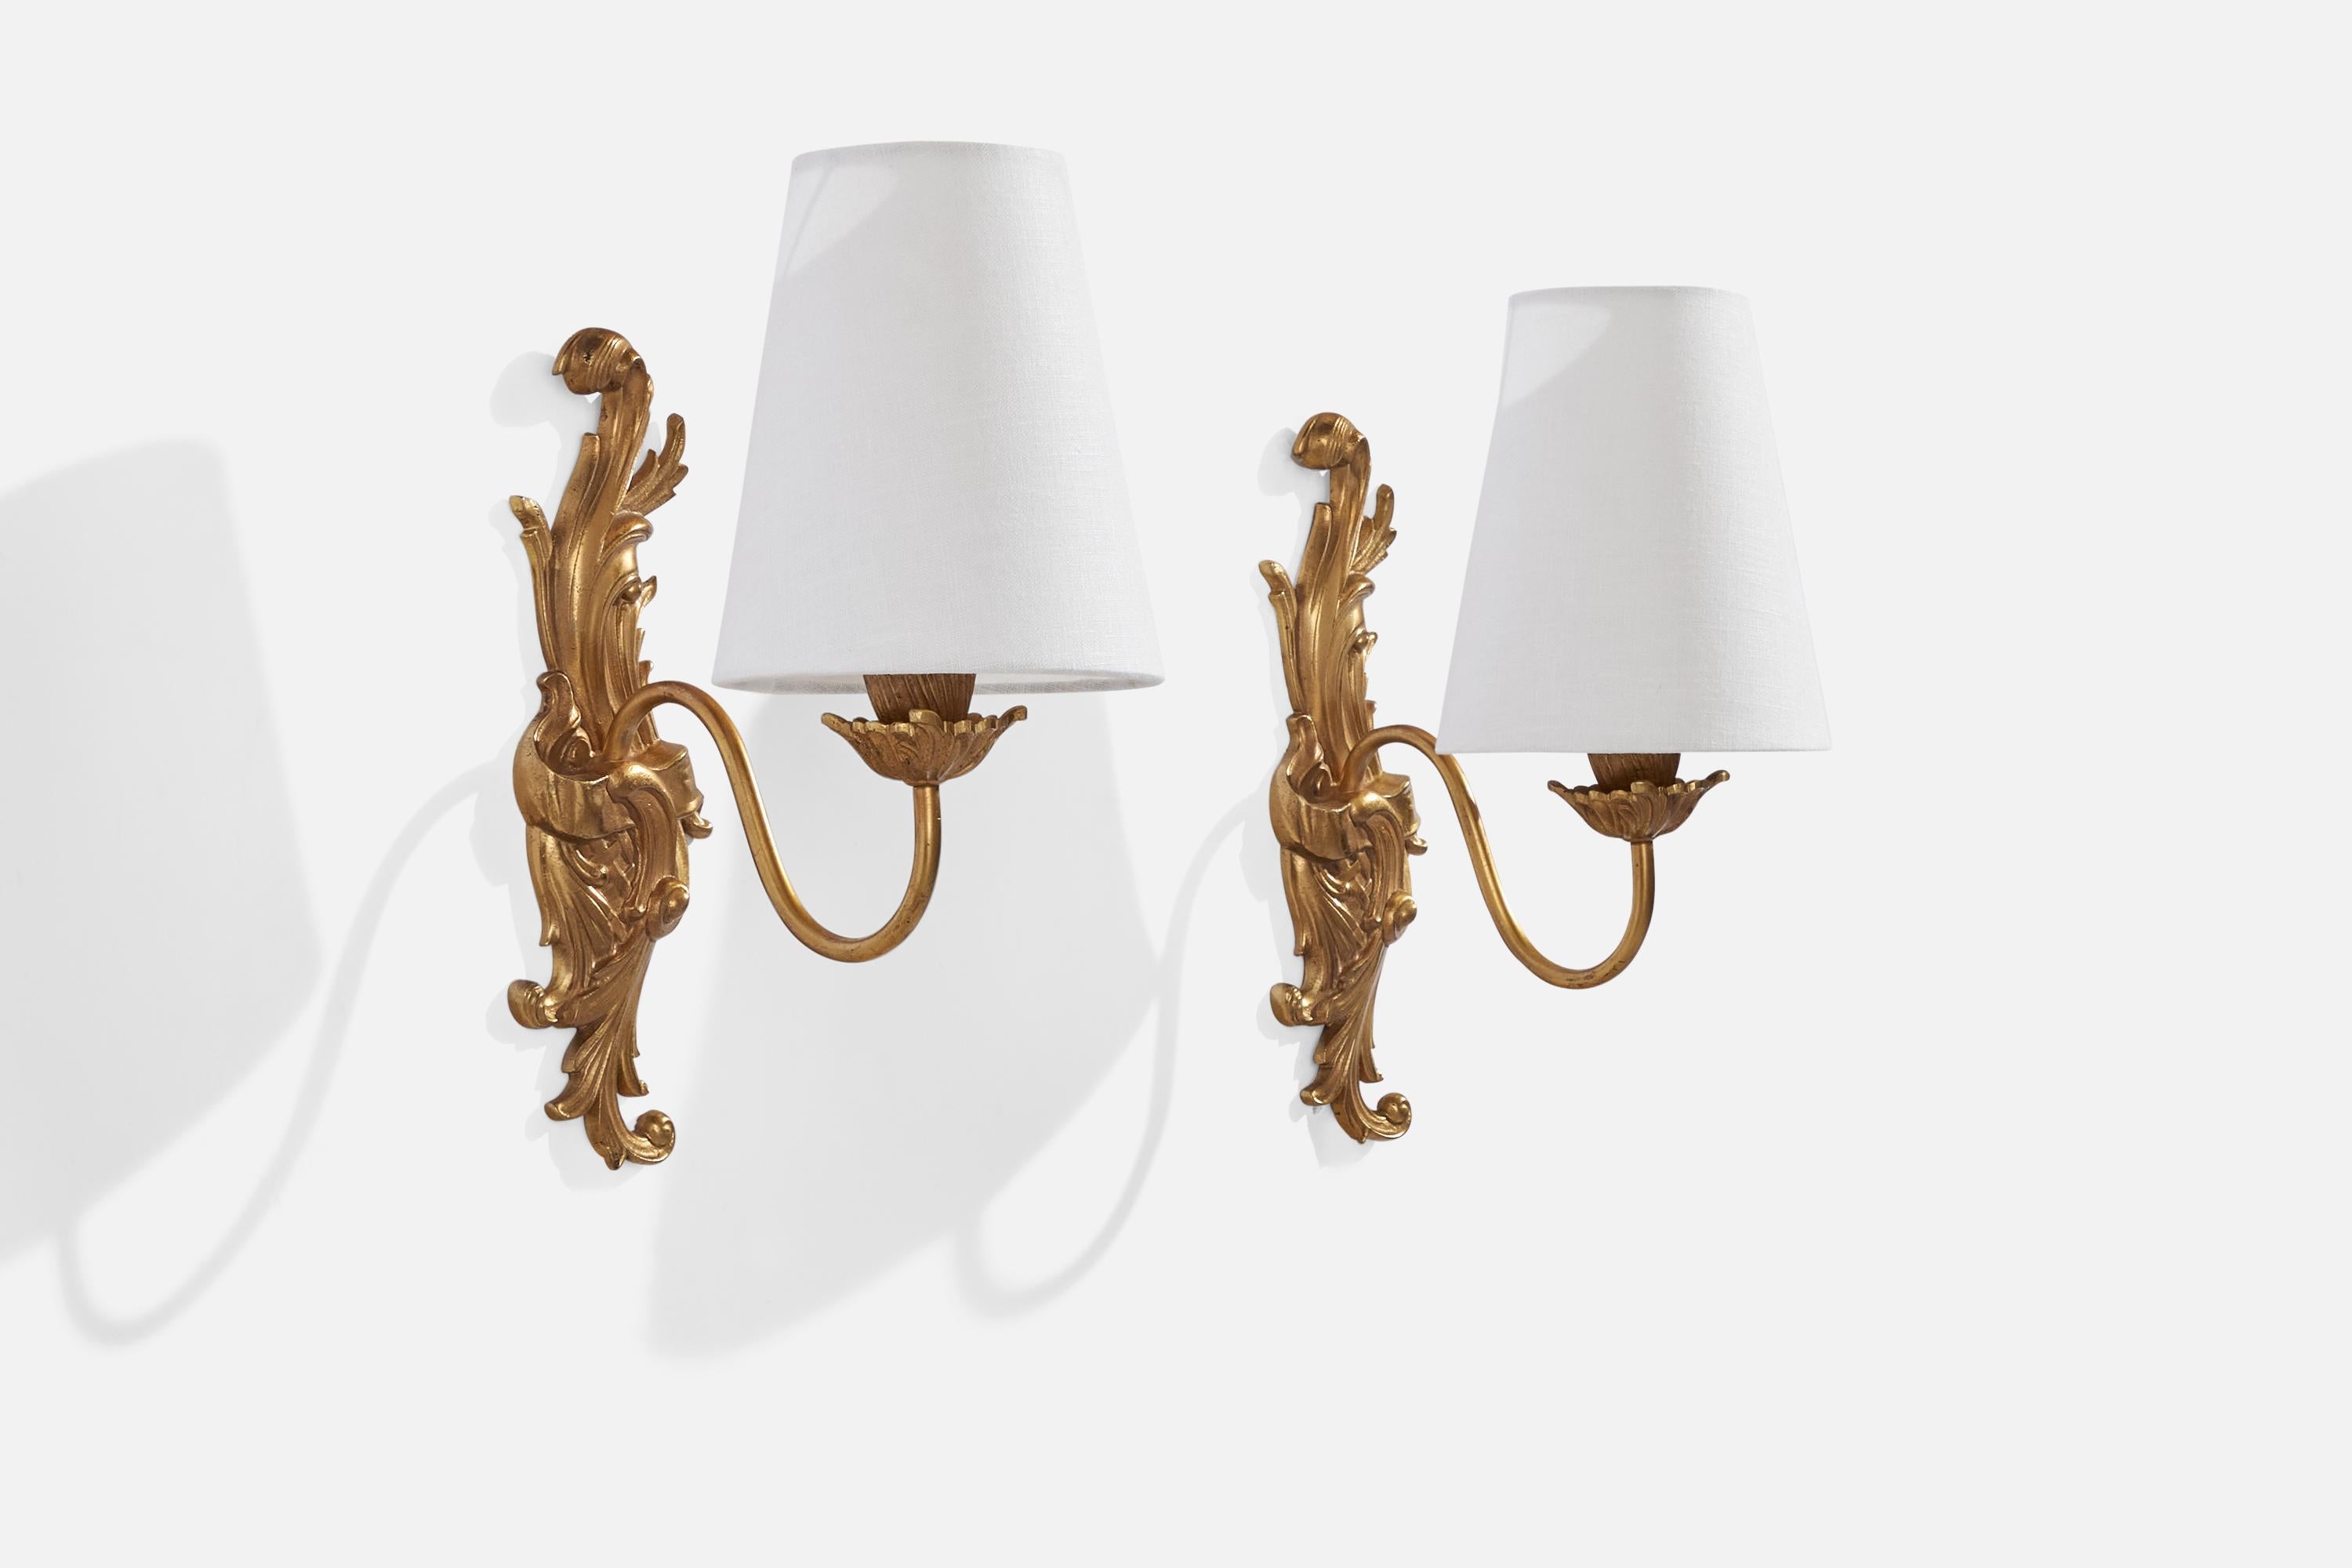 A pair of brass and white fabric wall lights designed and produced in France, c. 1940s.

Overall Dimensions (inches): 10” H x 3”  W x 6.25”  D
Back Plate Dimensions (inches): N/A
Bulb Specifications: E-12 Bulb
Number of Sockets: 2
All lighting will